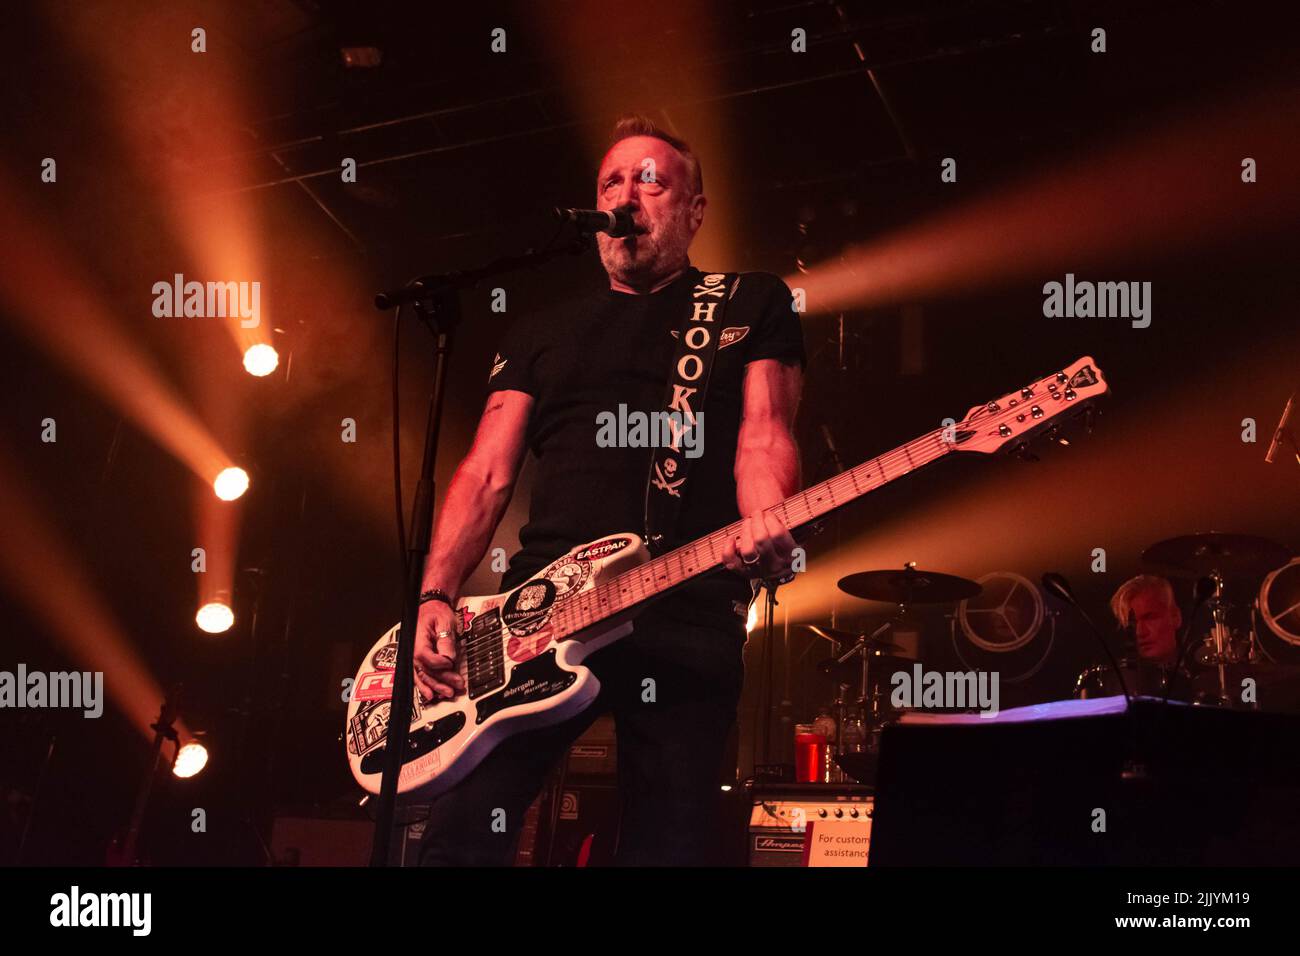 Peter Hook & The Light - Barrowland Glasgow 28. July 2022 Credit: Glasgow Green at Winter Time/Alamy Live News Stockfoto